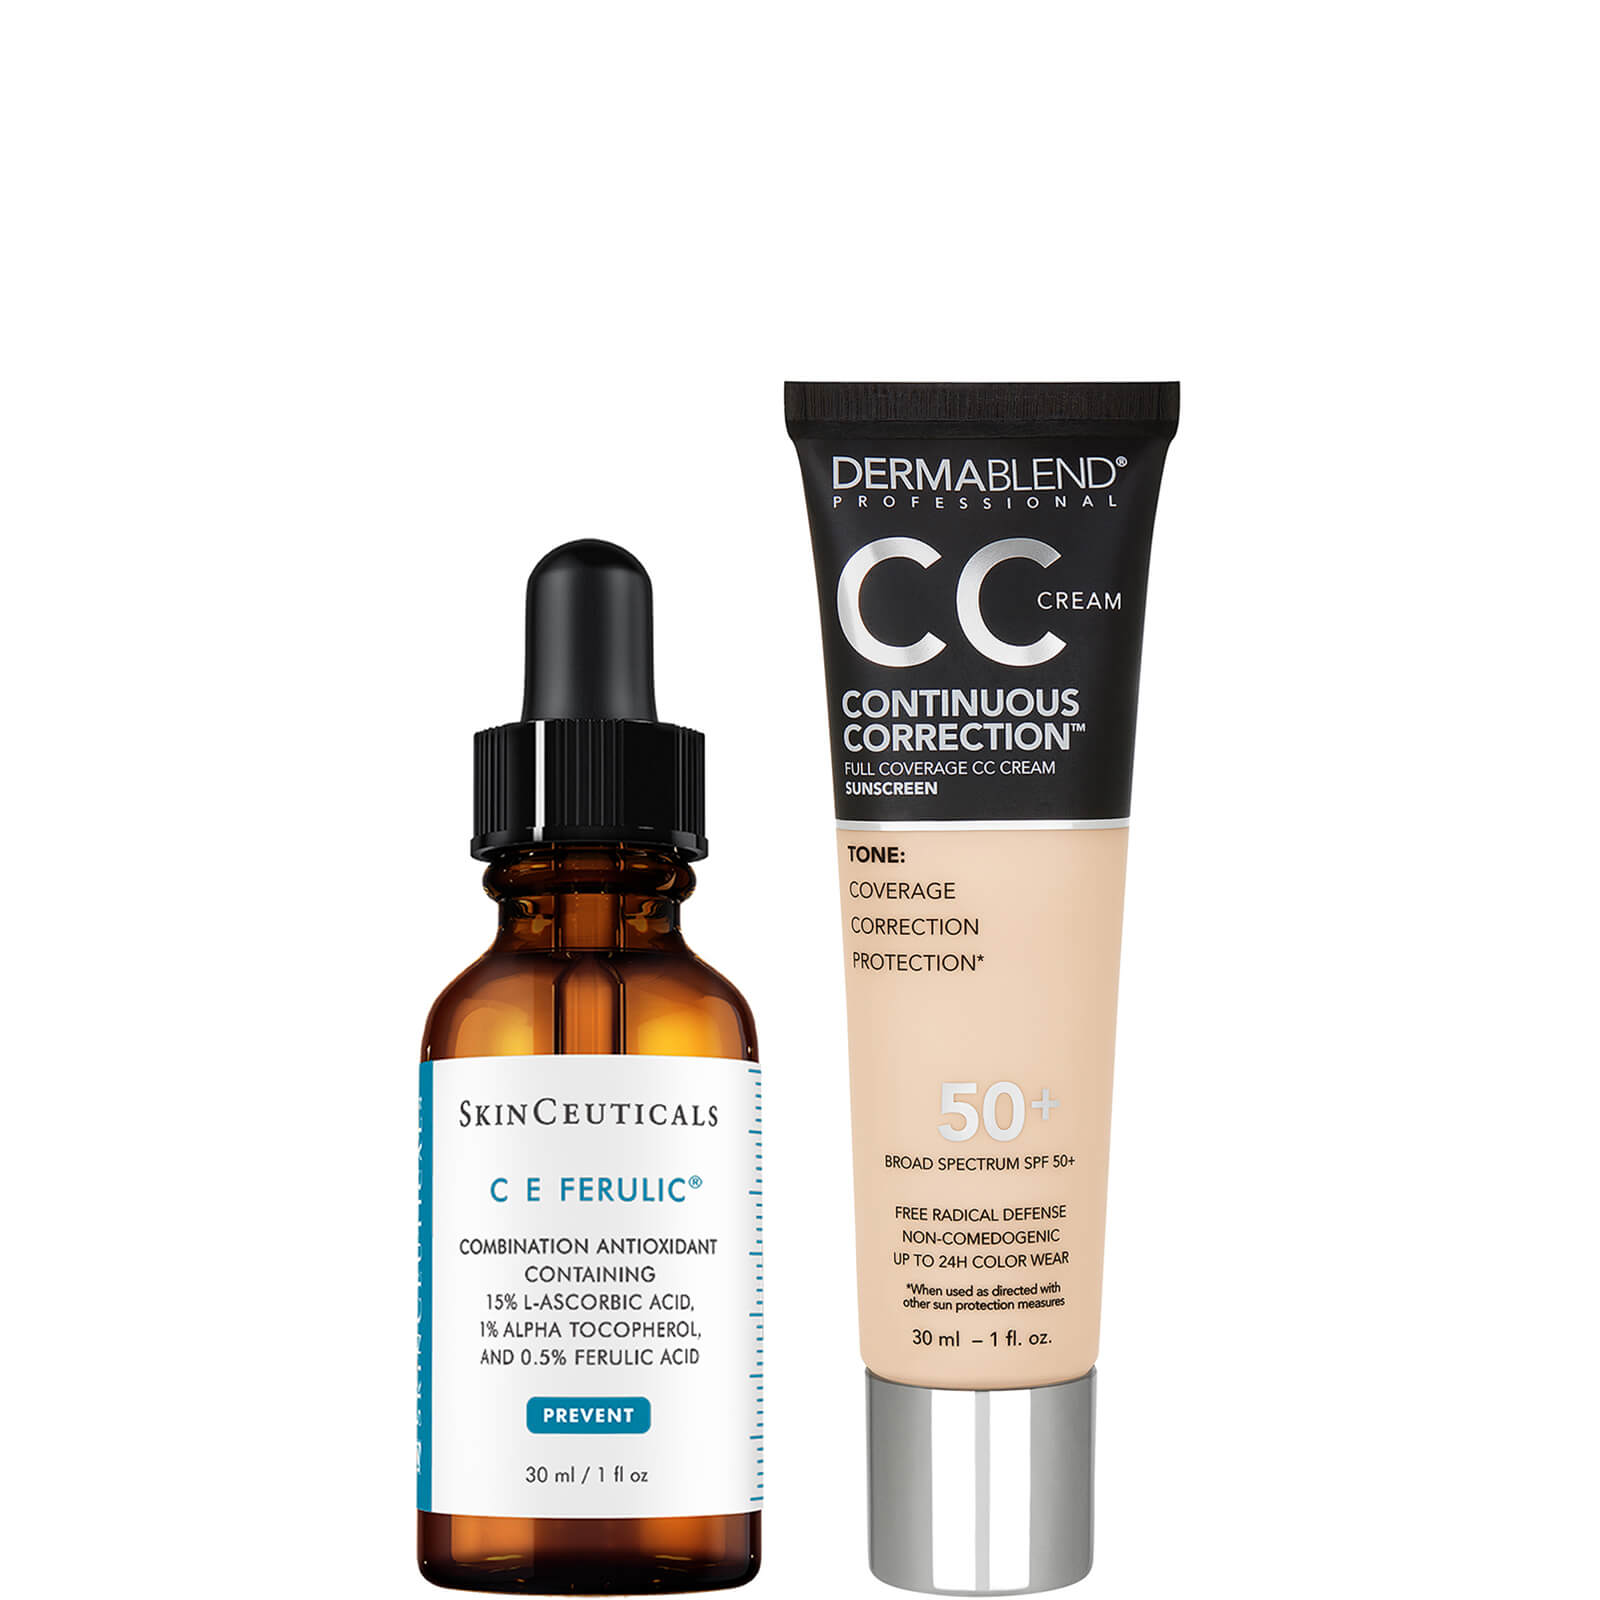 SkinCeuticals and Dermablend Anti-Aging Brightening Duo with Vitamin C and Niacinamide (Various Shades) ($223 Value) - 15N Fair 2